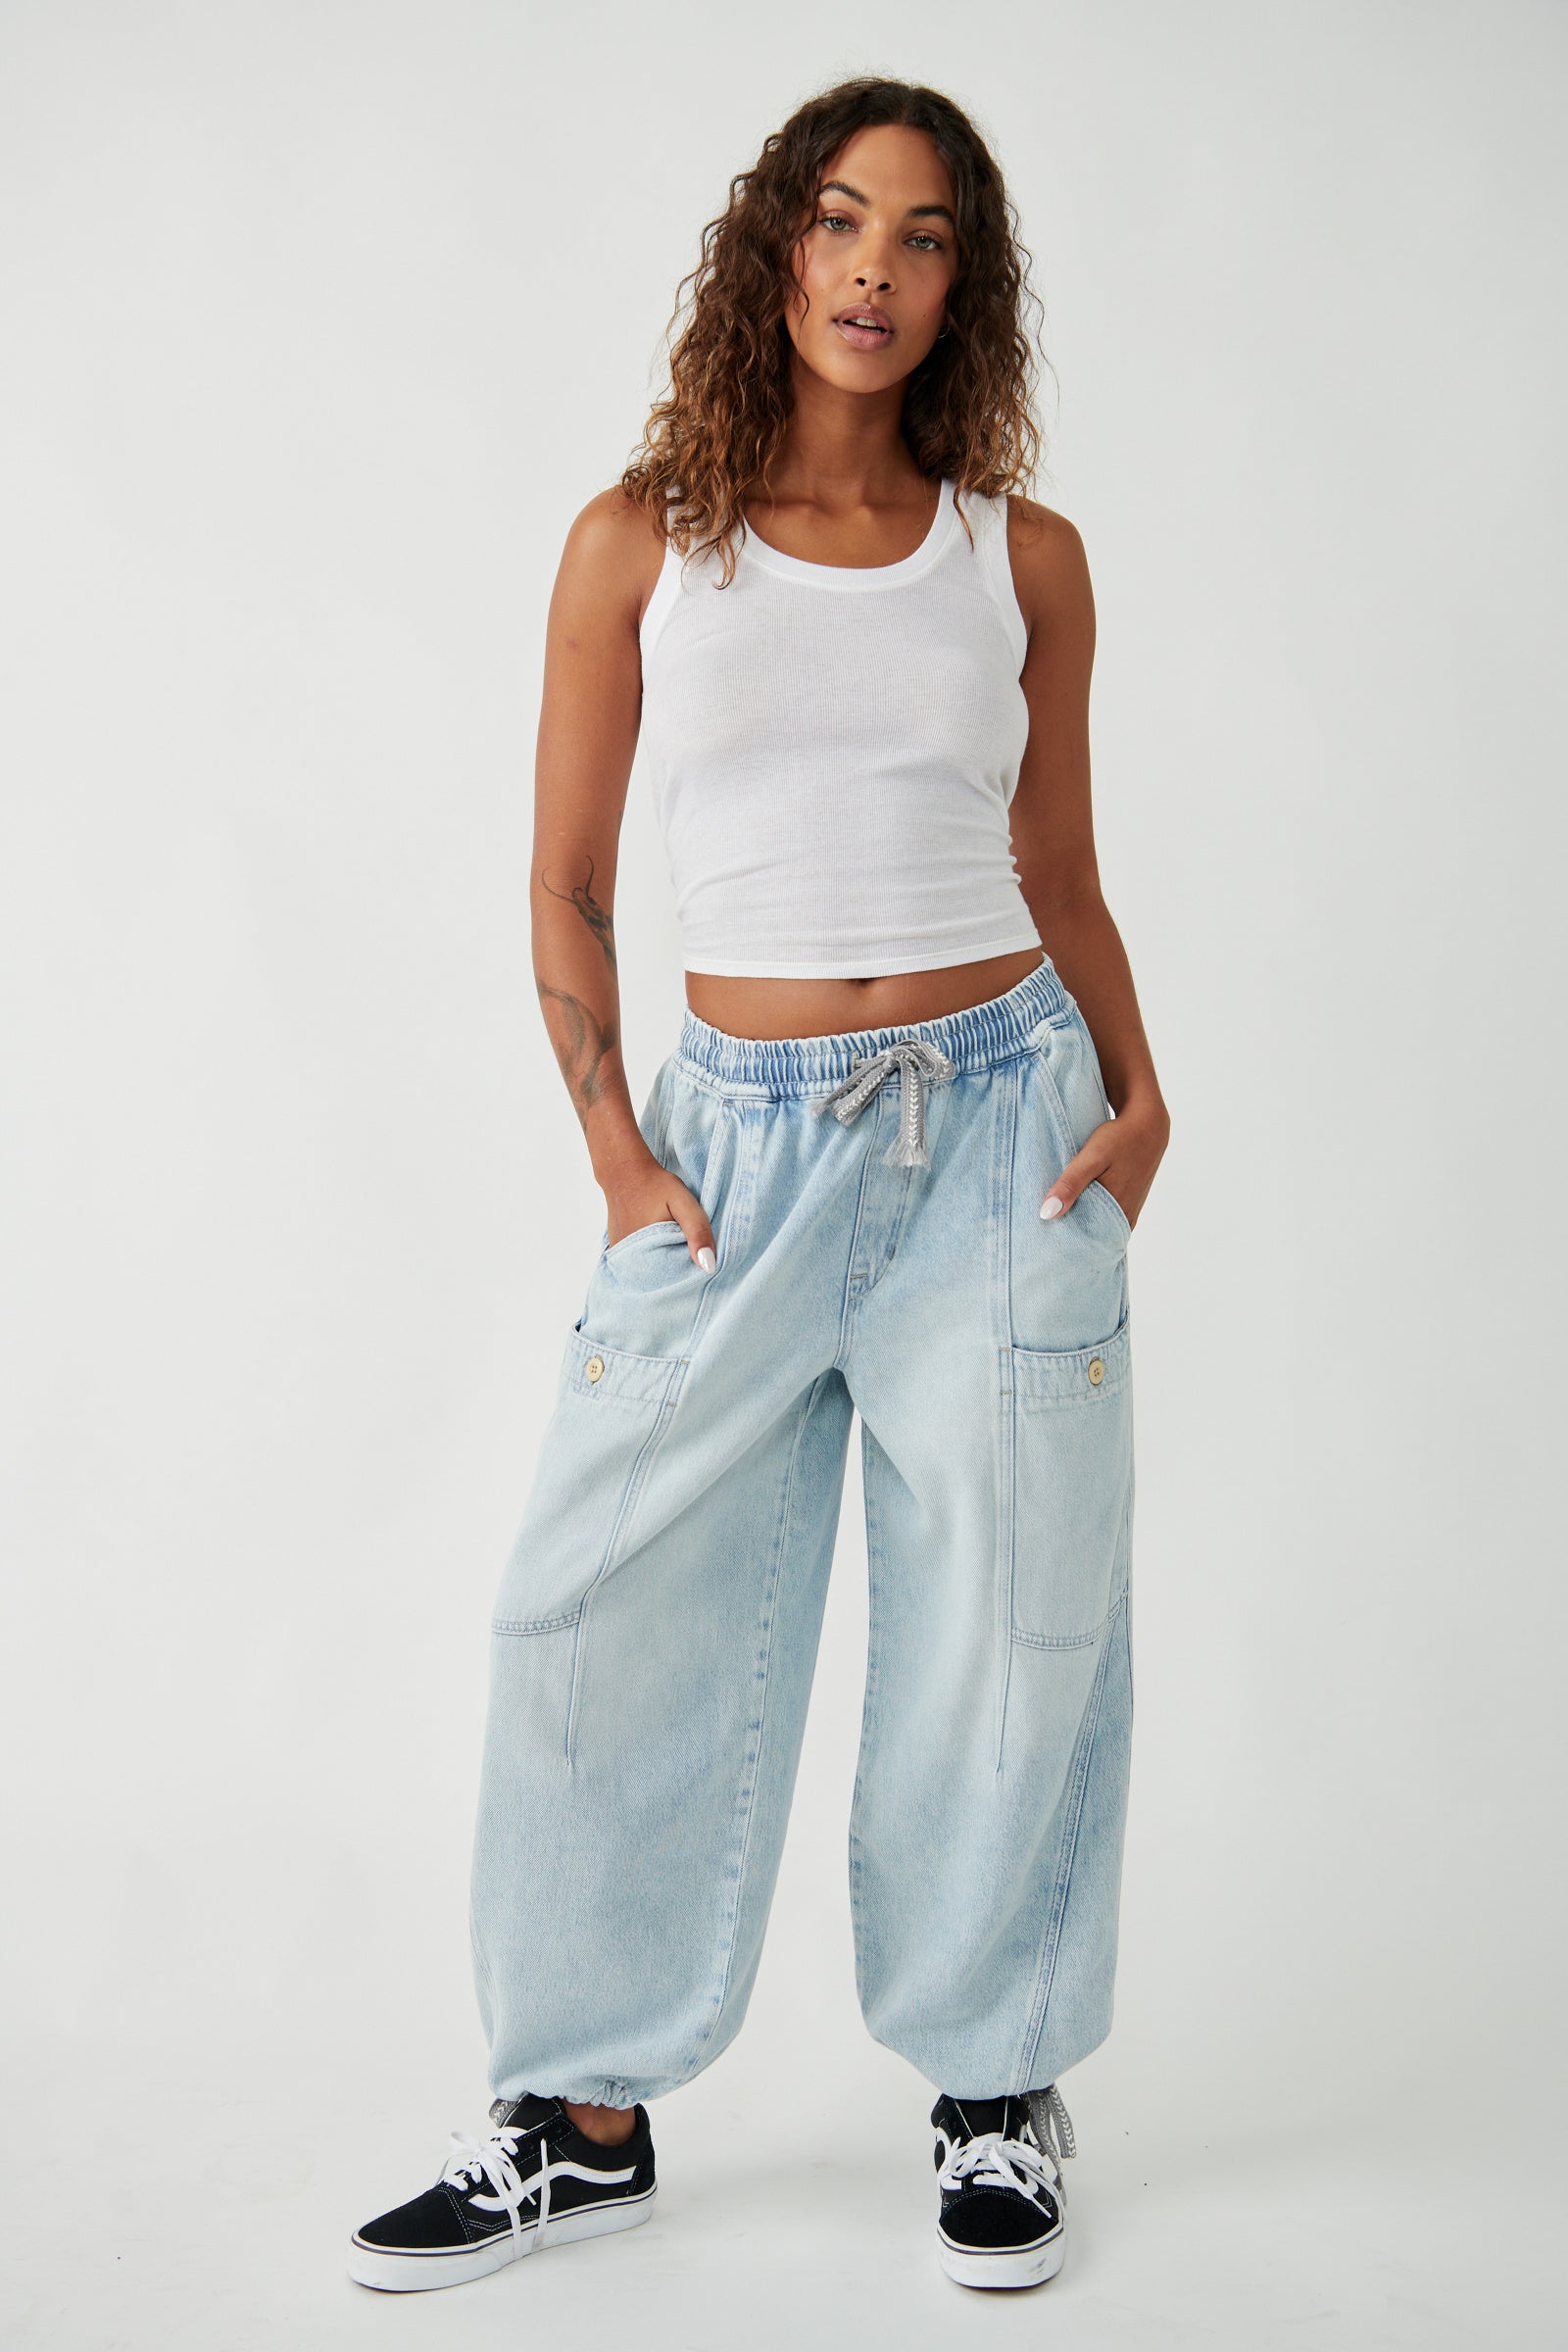 BRIGHT EYED LOW SLUNG PULL ON JEANS – Think Bubbles